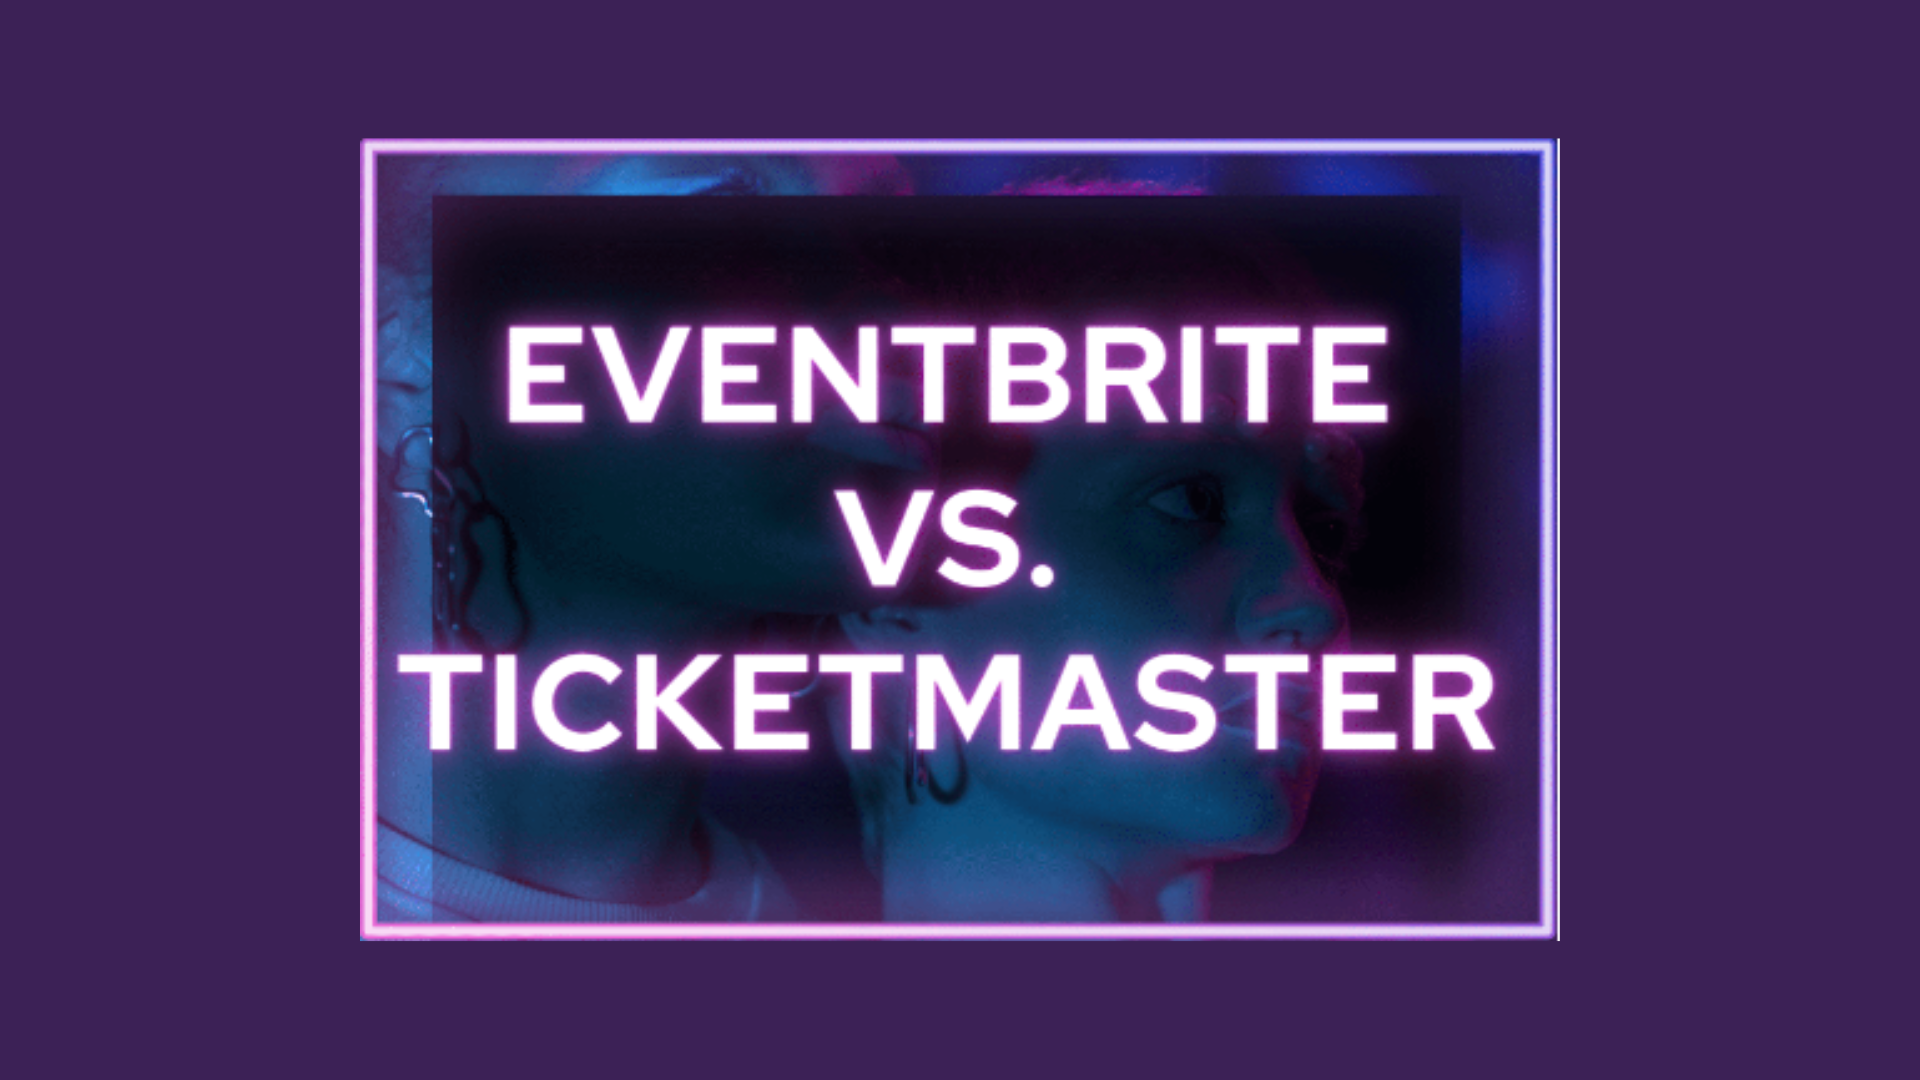 To discover whether Eventbrite or Ticketmaster is superior, please continue reading.